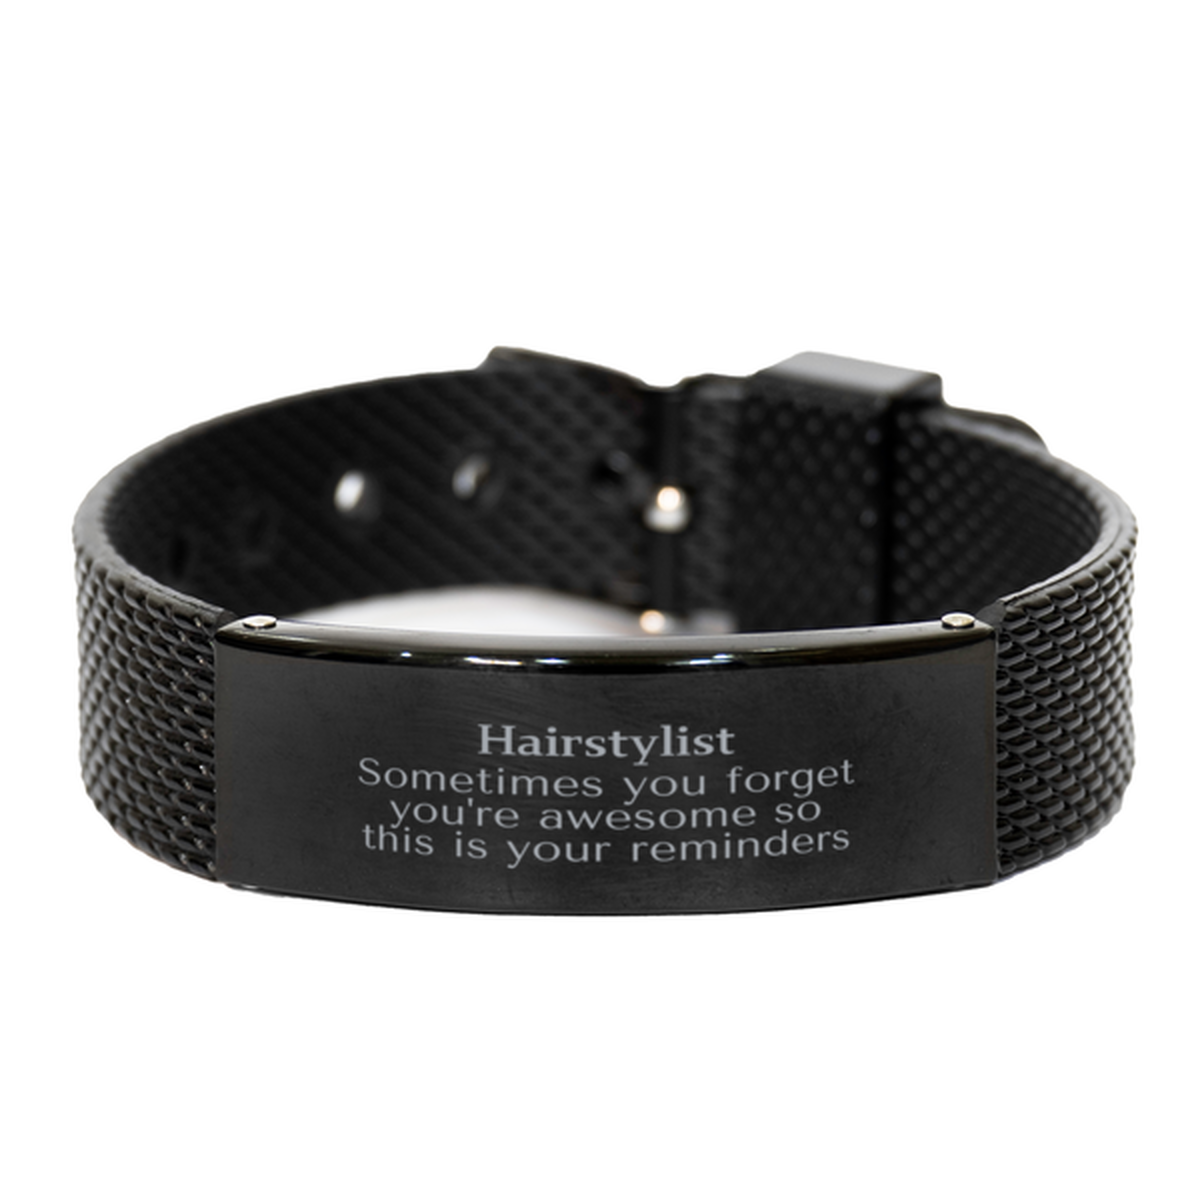 Sentimental Hairstylist Black Shark Mesh Bracelet, Hairstylist Sometimes you forget you're awesome so this is your reminders, Graduation Christmas Birthday Gifts for Hairstylist, Men, Women, Coworkers